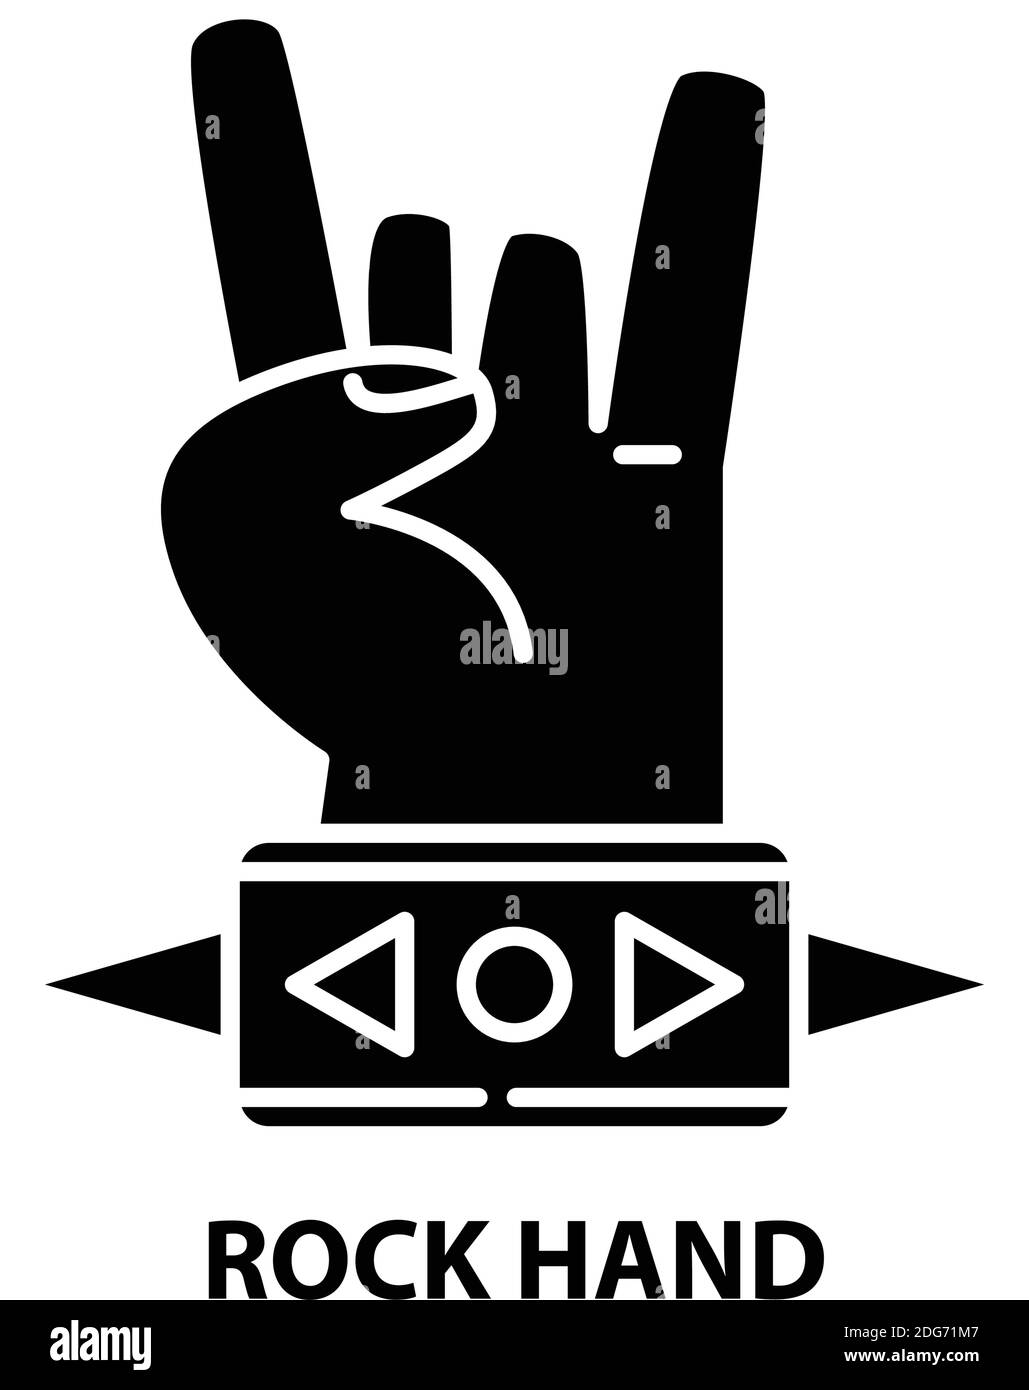 rock hand icon, black vector sign with editable strokes, concept illustration Stock Vector